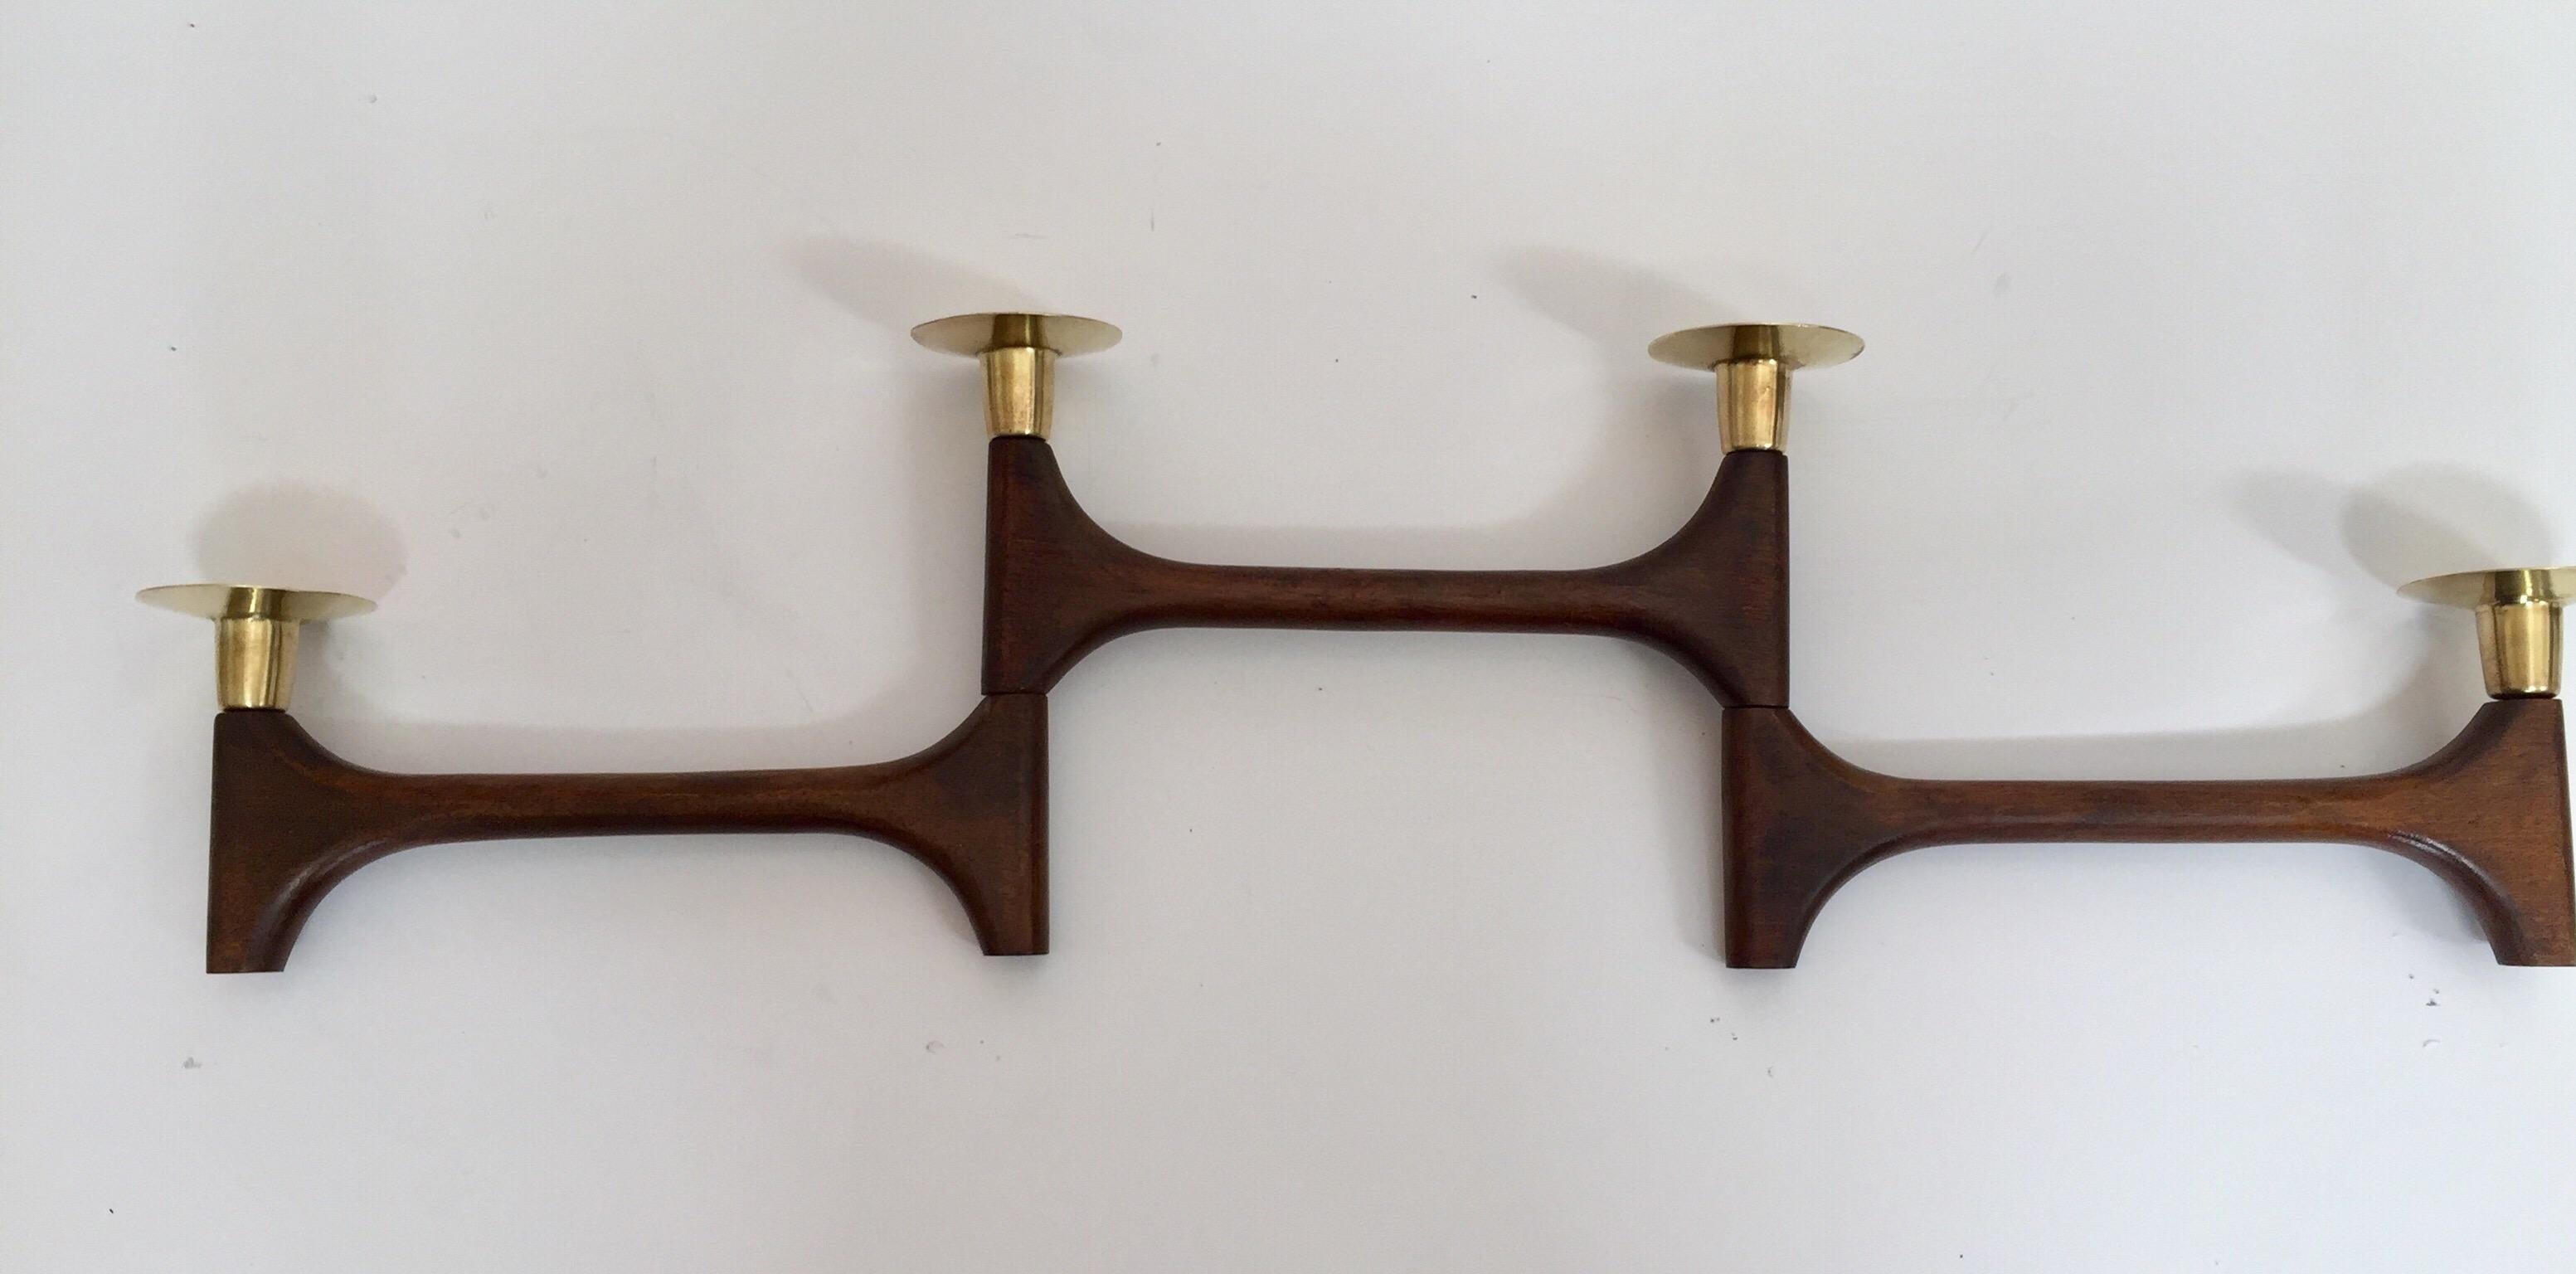 Hand-Crafted Mid-Century Modern Articulating Teak and Brass Folding Candleholder